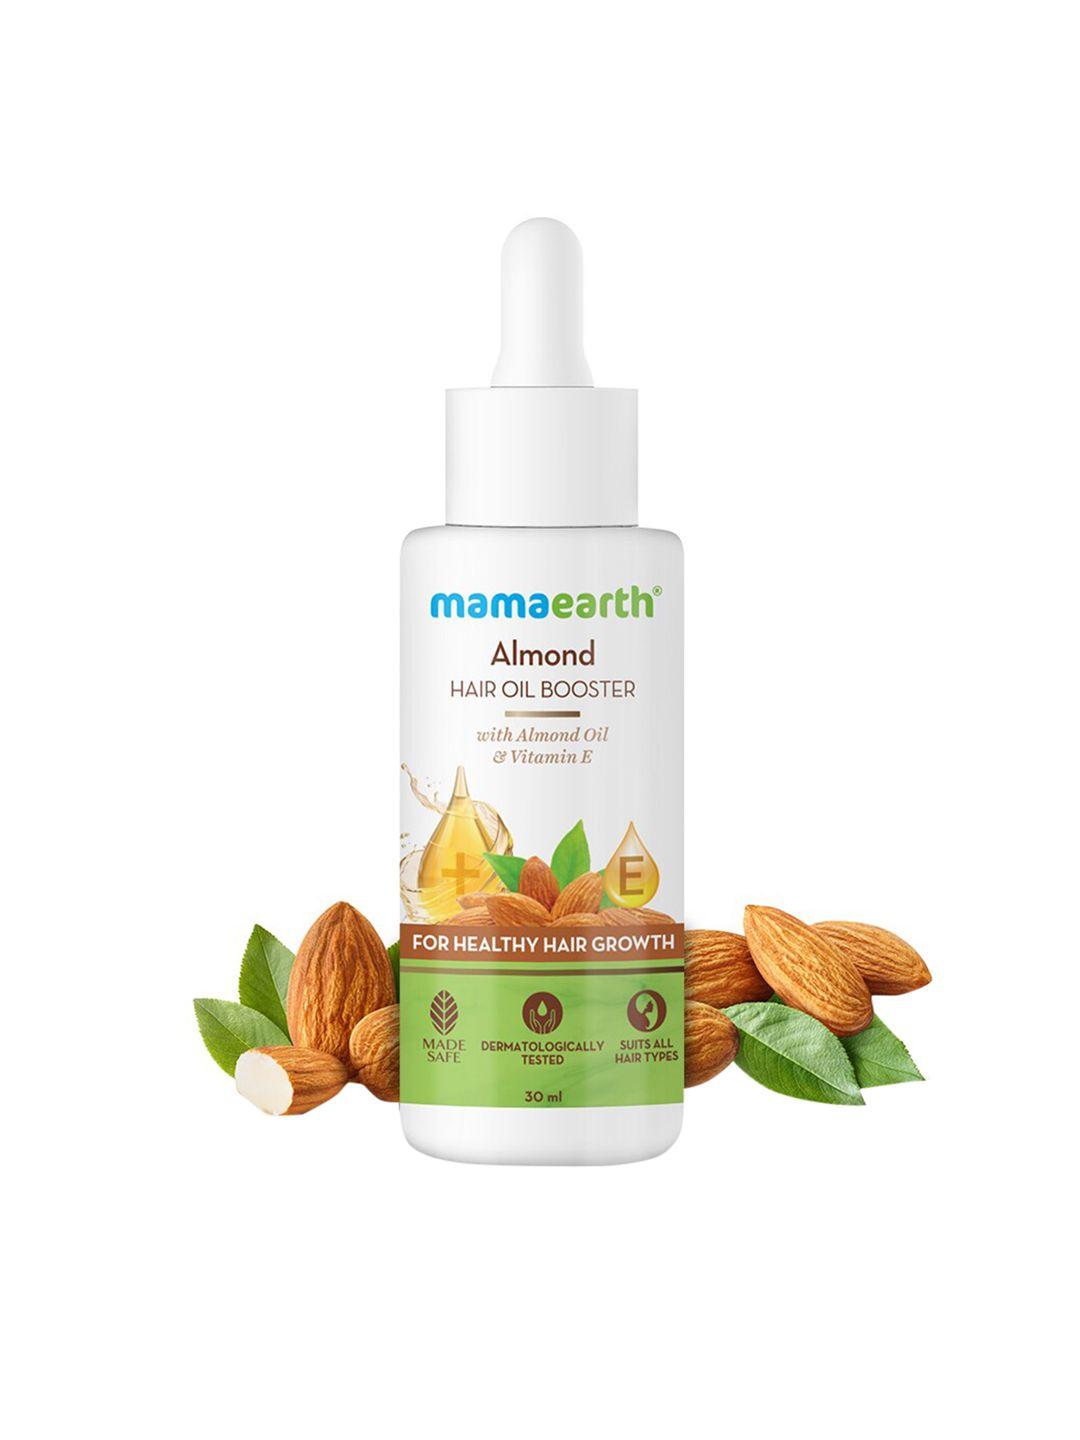 mamaearth almond hair oil booster with almond oil & vitamin e & for healthy hair growth - 30 ml